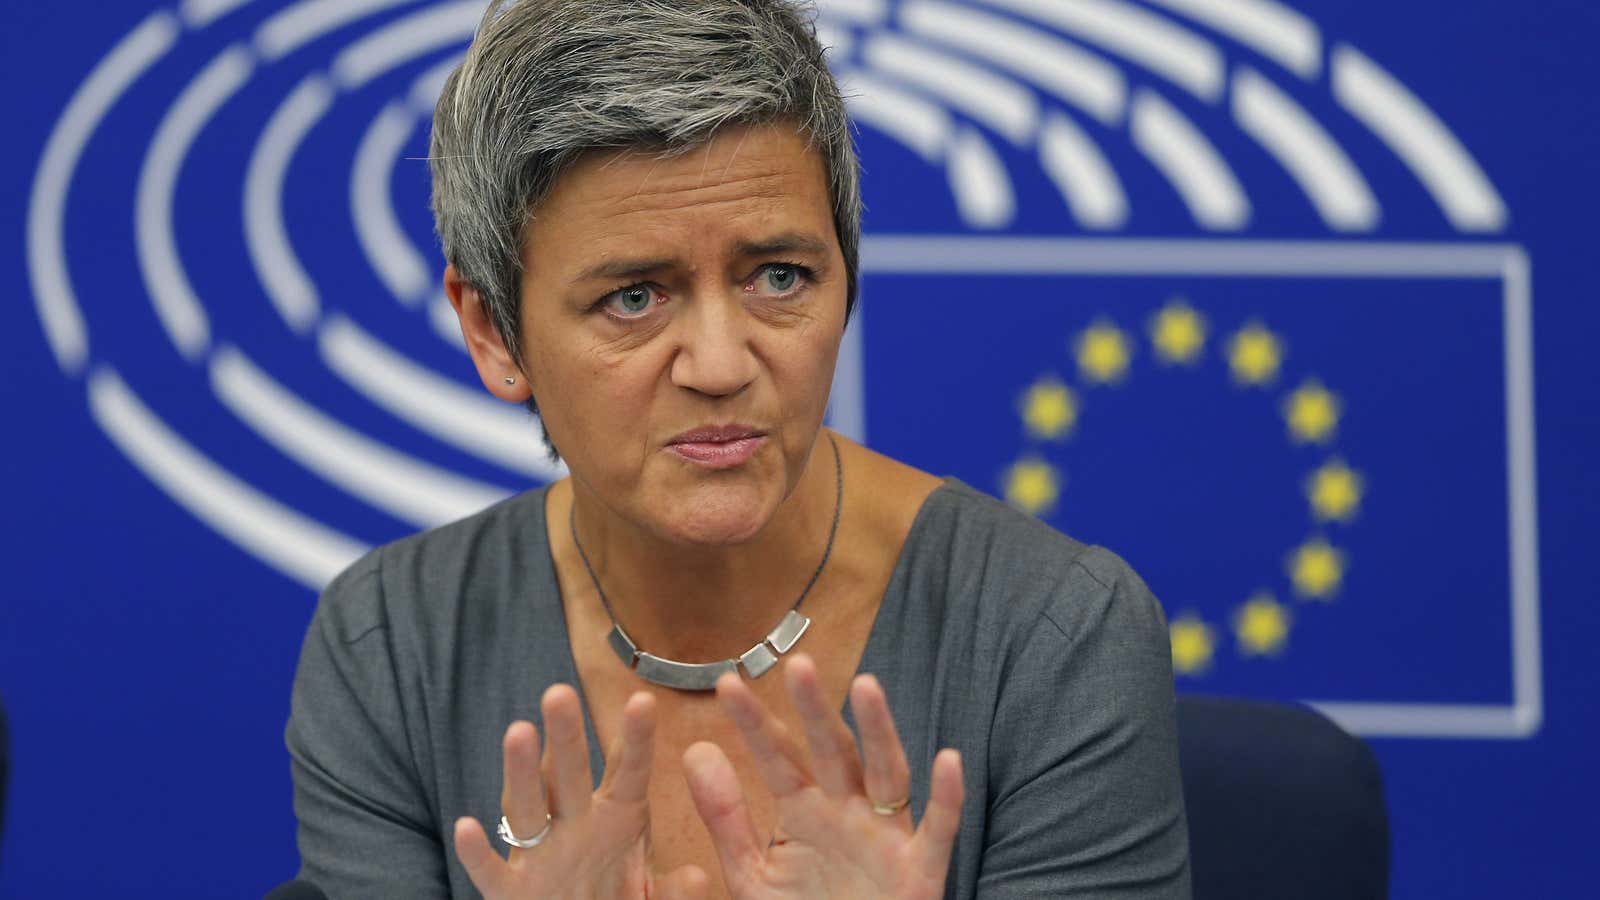 European Competition Commissioner Margrethe Vestager holds a news conference on the takeover of Alstom’s power businesses by U.S. conglomerate General Electric at the European Parliament…